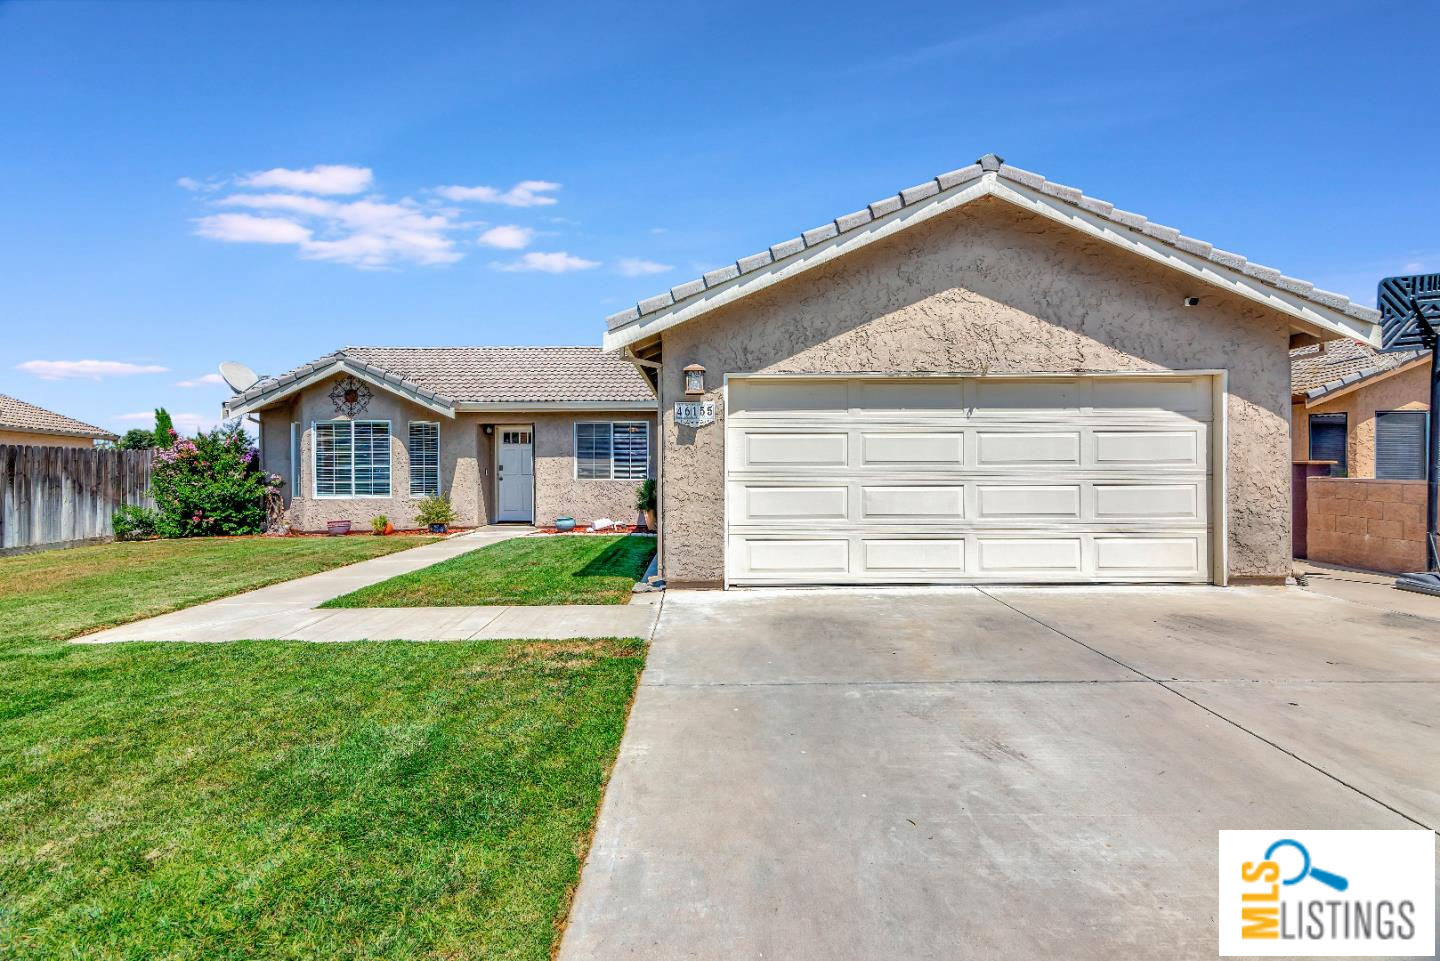 46155 Pine Meadow Dr, King City, CA 93930